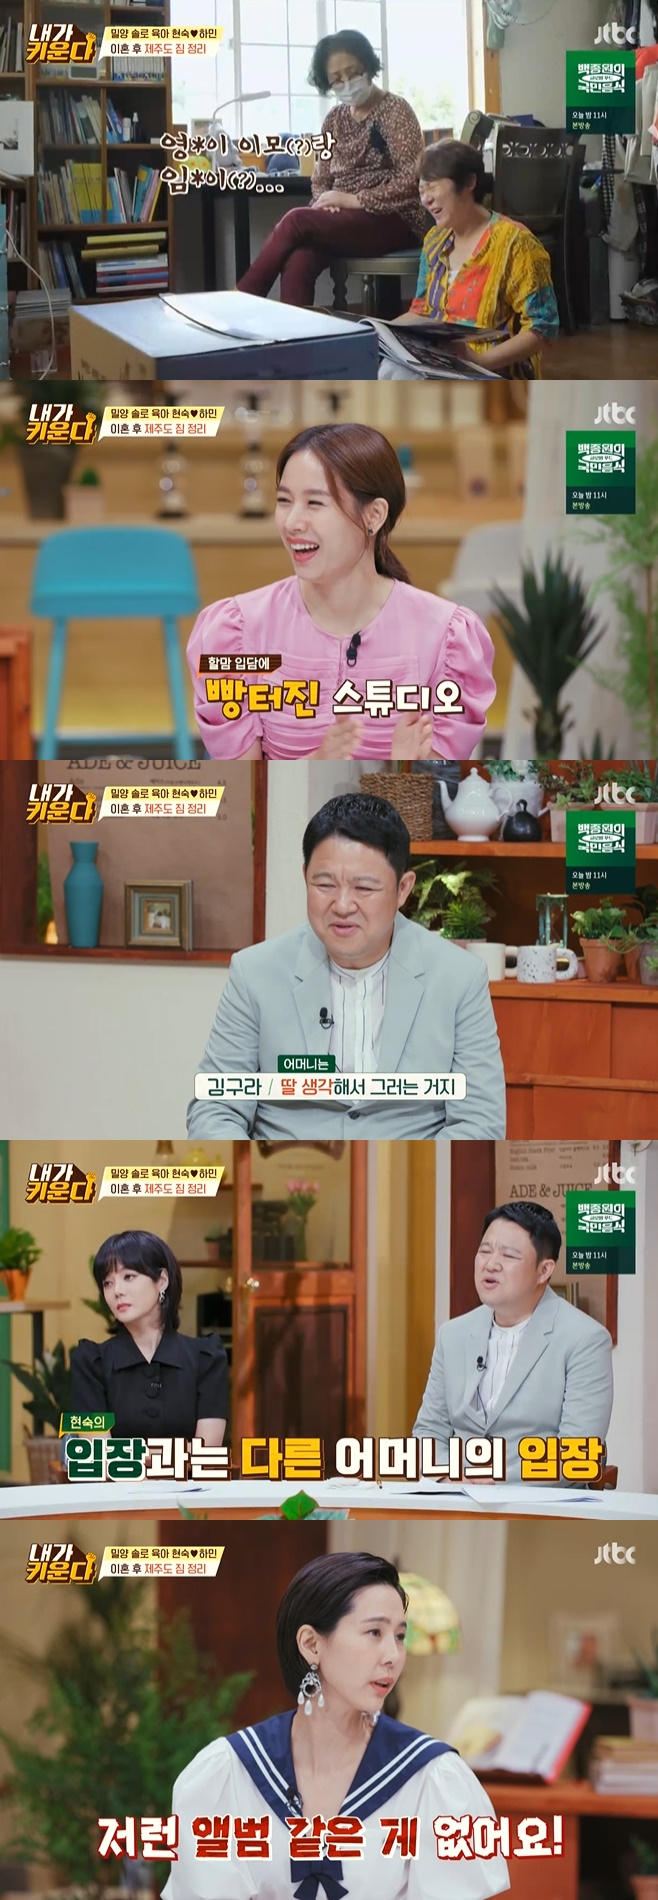 Actor Jo Yoon-hee has revealed he still has a picture of the former Husband Lee Dong-gun in I Raise.Kim Hyun-Sooks daily life was introduced in the JTBC entertainment program I Raise, which was broadcast on the 23rd night.On this day, Kim Hyun-Sook took out a wedding photo while organizing the luggage.My mother, who was watching this together, said, Do not you just come to that part?Kim Gulra said, In fact, I have a picture of my ex-wife. I do not know if it was not for a child, but it is a childs mother.So I could not come, he said, and Jo Yoon-hee also sympathized and said, Its a gift. I will give it to my child (Roar) later. Chae Rim added, I left it in a place I can not see now, but I have it because I think there will be a time when I want to see my child someday. Kim Na Young said, I do not have an album because I do not have a proper wedding ceremony.But it keeps coming to the mobile phone synchronization service. 